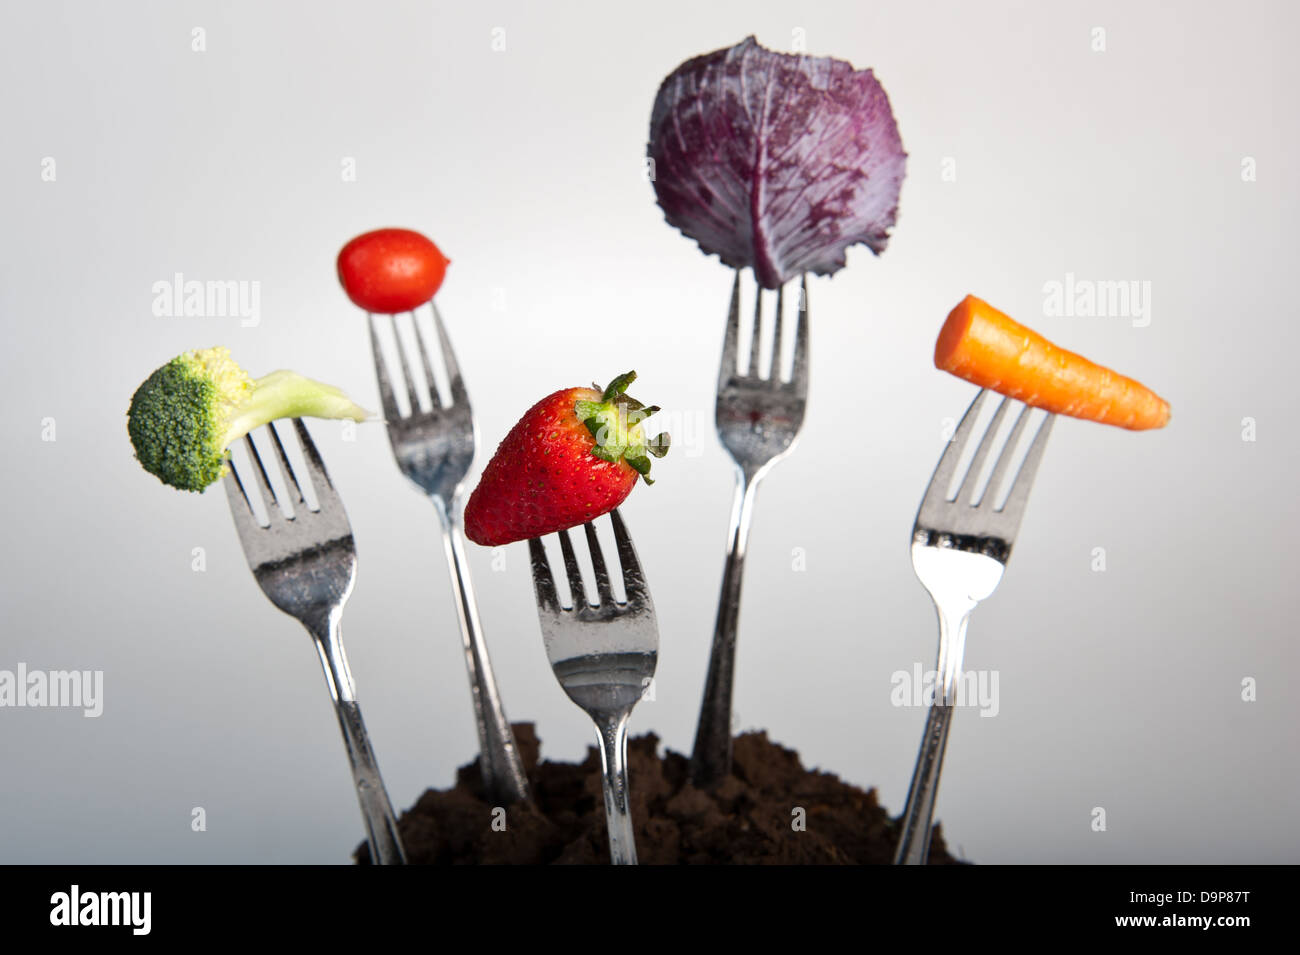 5 forks in soil each containing some vegetable or fruit with tiny water drops on surface. Stock Photo